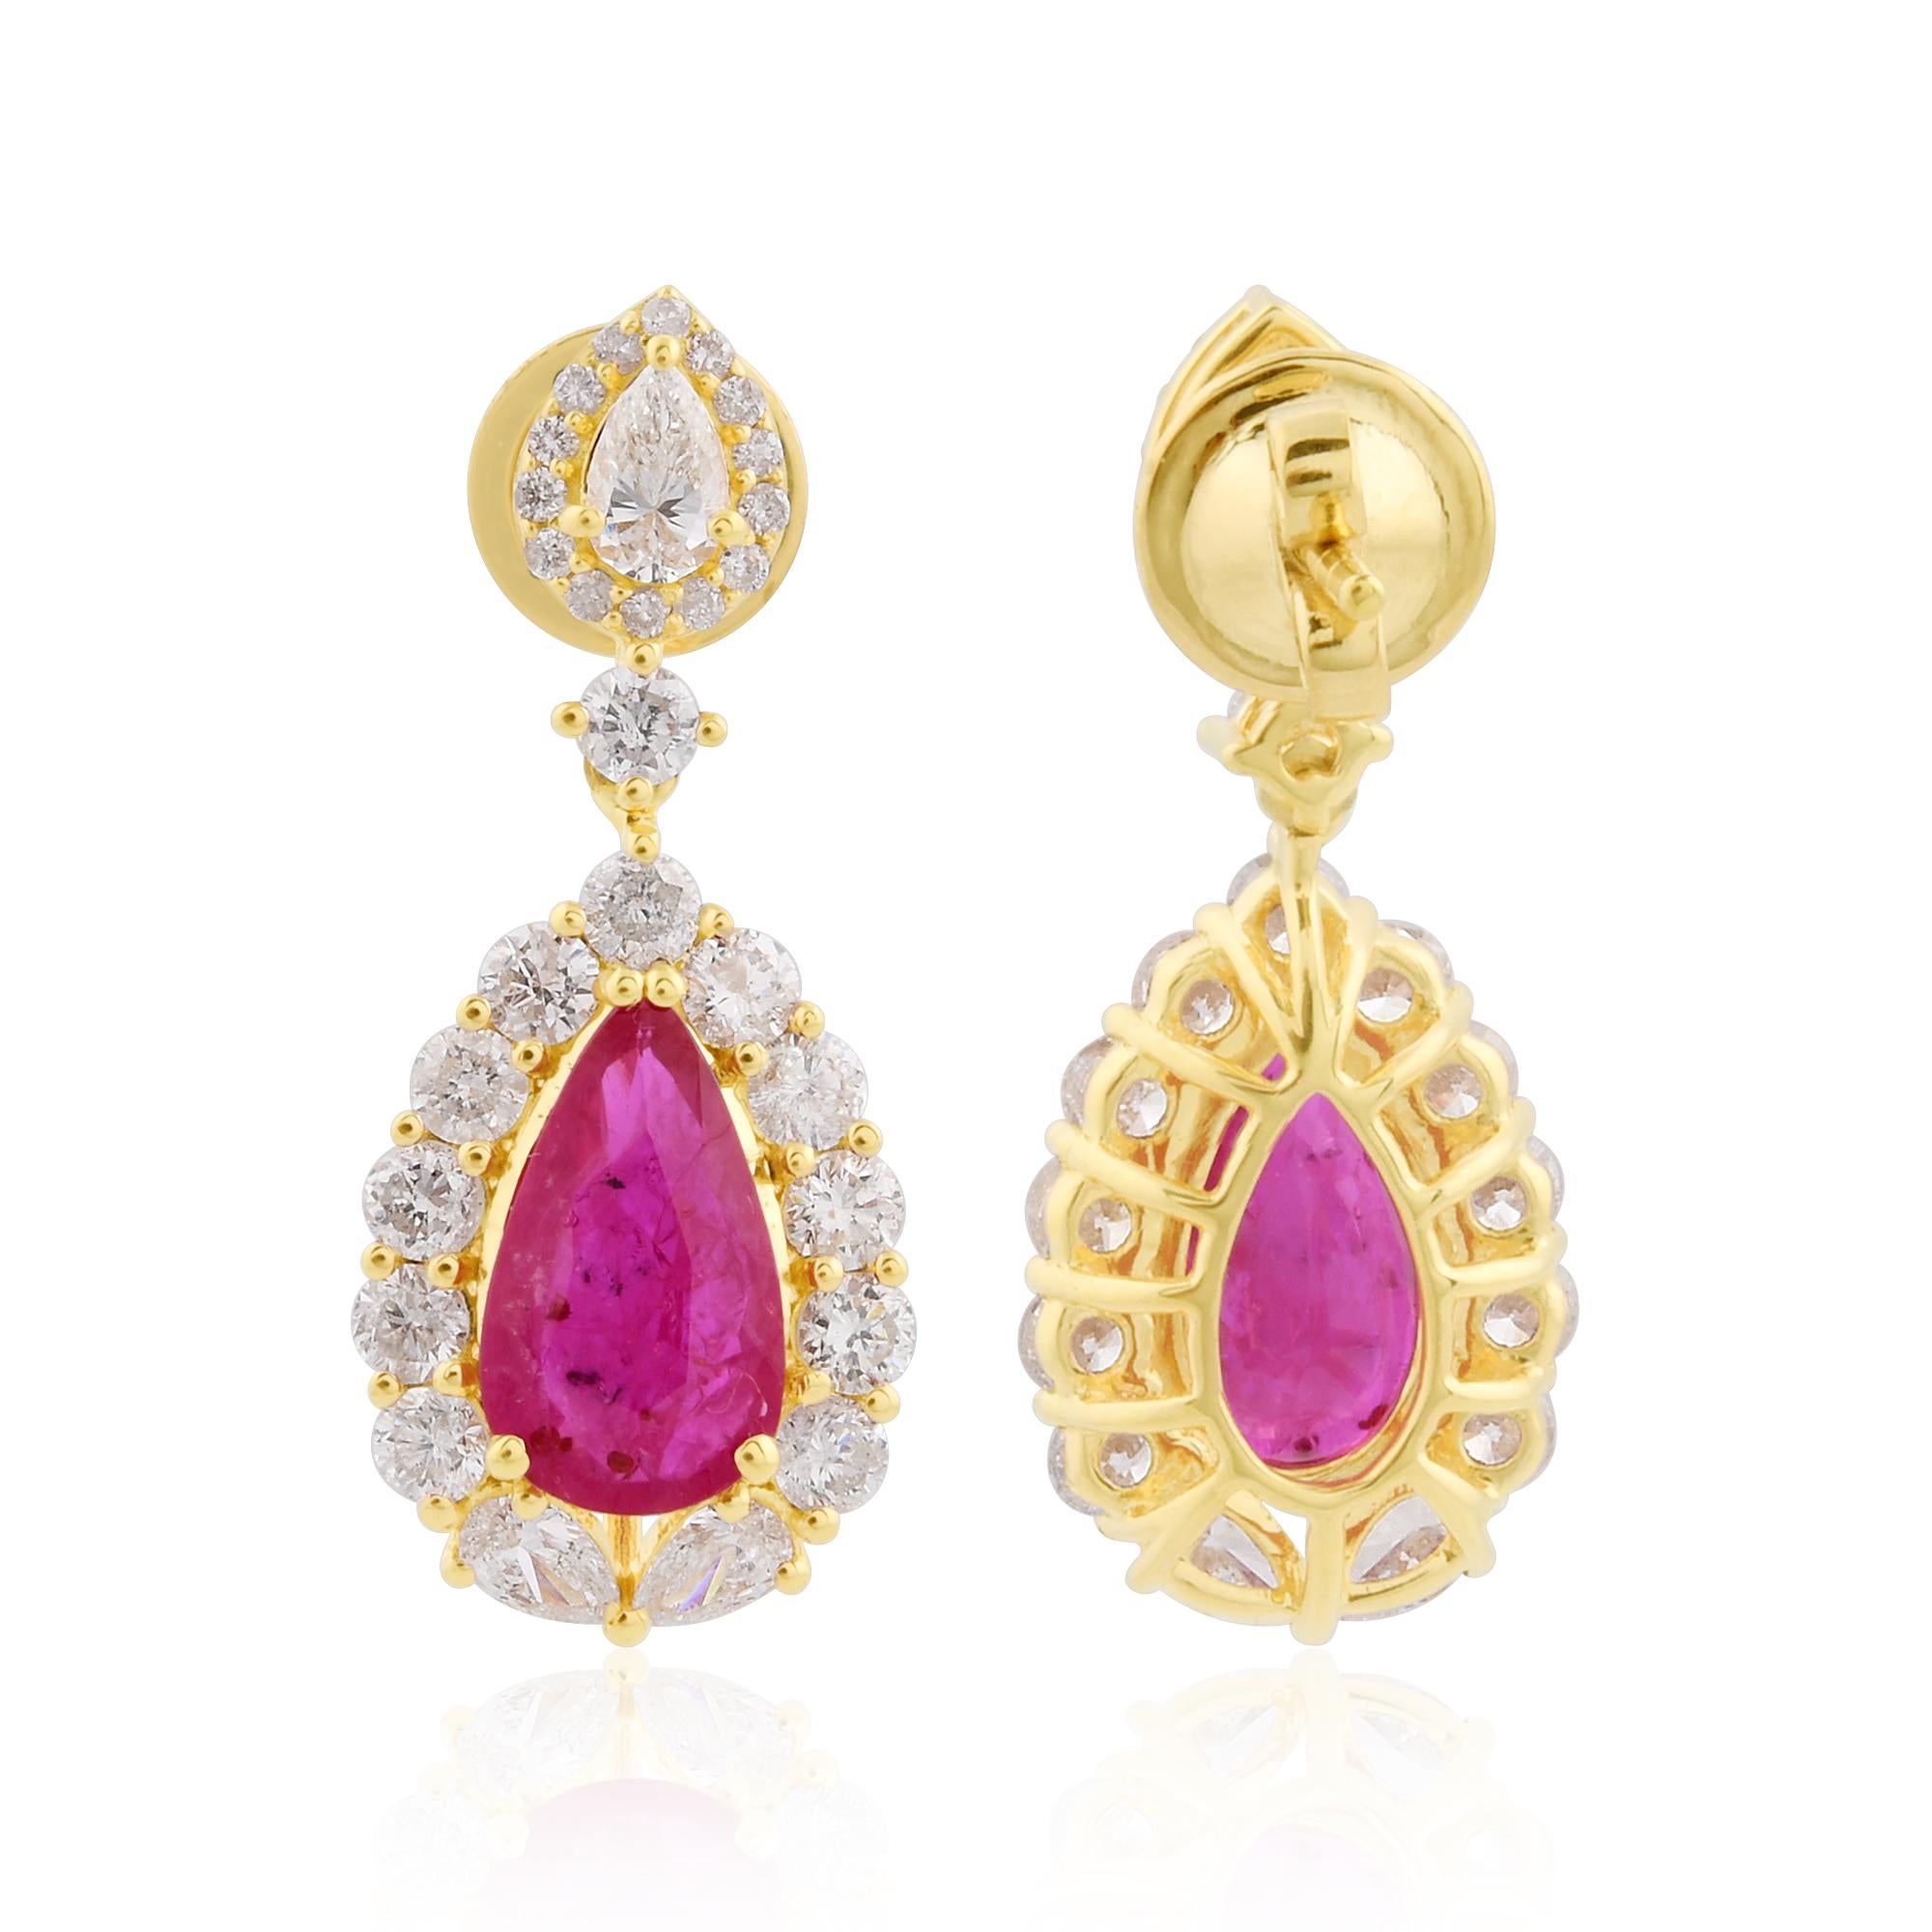 Item Code :- SEE-12431
Gross Wt. :- 6.44 gm
18k Yellow Gold Wt. :- 5.36 gm
Diamond Wt. :- 2.24 Ct. ( AVERAGE DIAMOND CLARITY SI1-SI2 & COLOR H-I )
Ruby Wt. :- 3.15 Ct.
Earrings Size :- 27 X 12 mm approx.
✦ Sizing
.....................
We can adjust